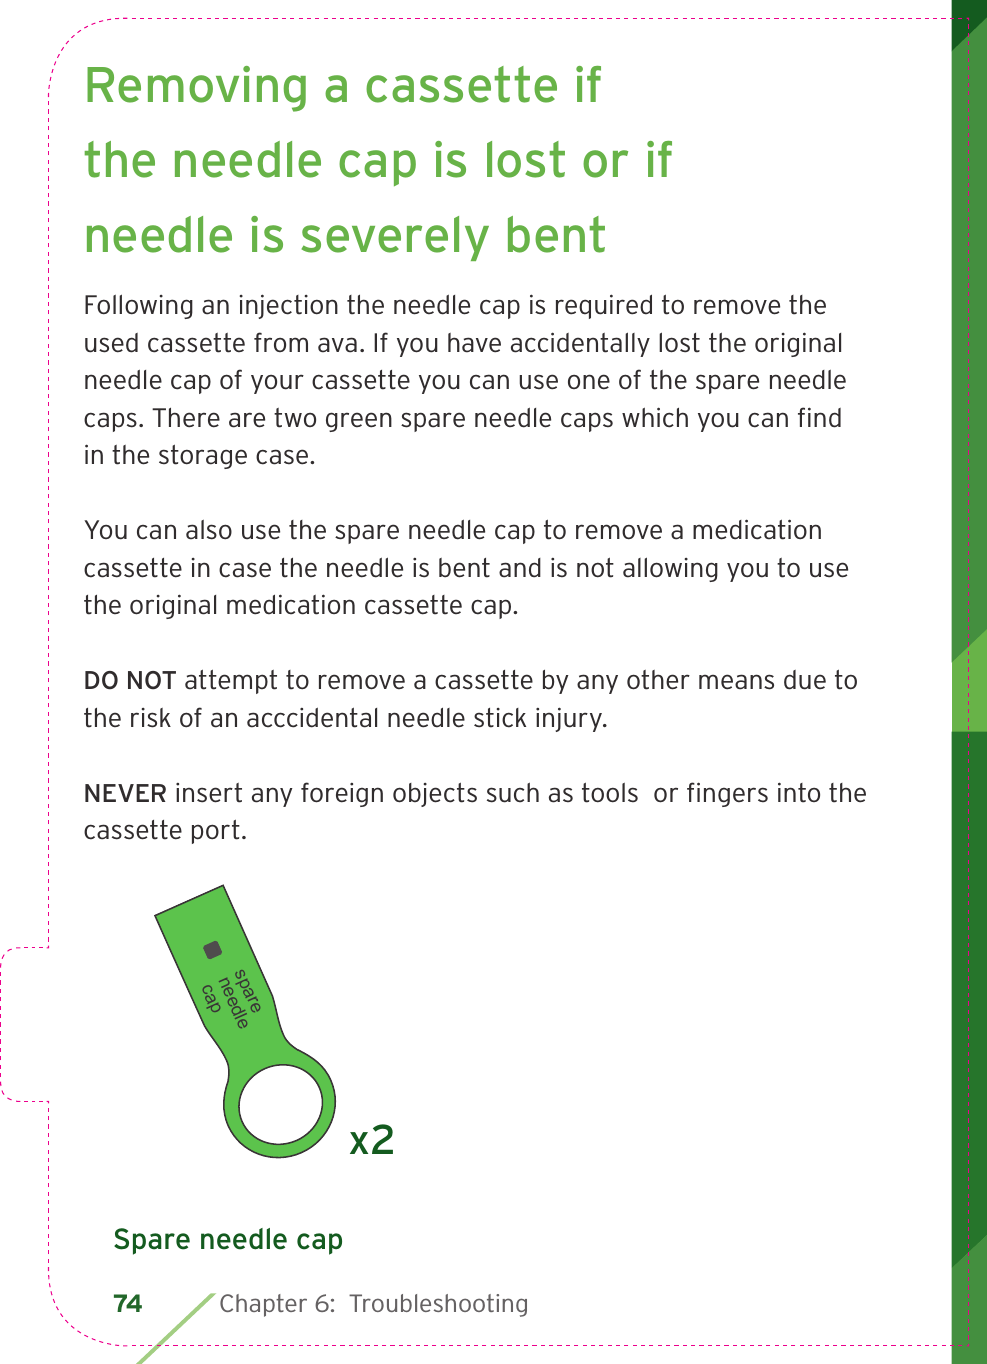 74  Chapter 6:  Troubleshooting  Removing a cassette if the needle cap is lost or if needle is severely bentFollowing an injection the needle cap is required to remove the used cassette from ava. If you have accidentally lost the original needle cap of your cassette you can use one of the spare needle caps. There are two green spare needle caps which you can ﬁ nd in the storage case.You can also use the spare needle cap to remove a medication cassette in case the needle is bent and is not allowing you to use the original medication cassette cap. DO NOT attempt to remove a cassette by any other means due to the risk of an acccidental needle stick injury. NEVER insert any foreign objects such as tools  or ﬁ ngers into the cassette port.spare needle capx2Spare needle cap